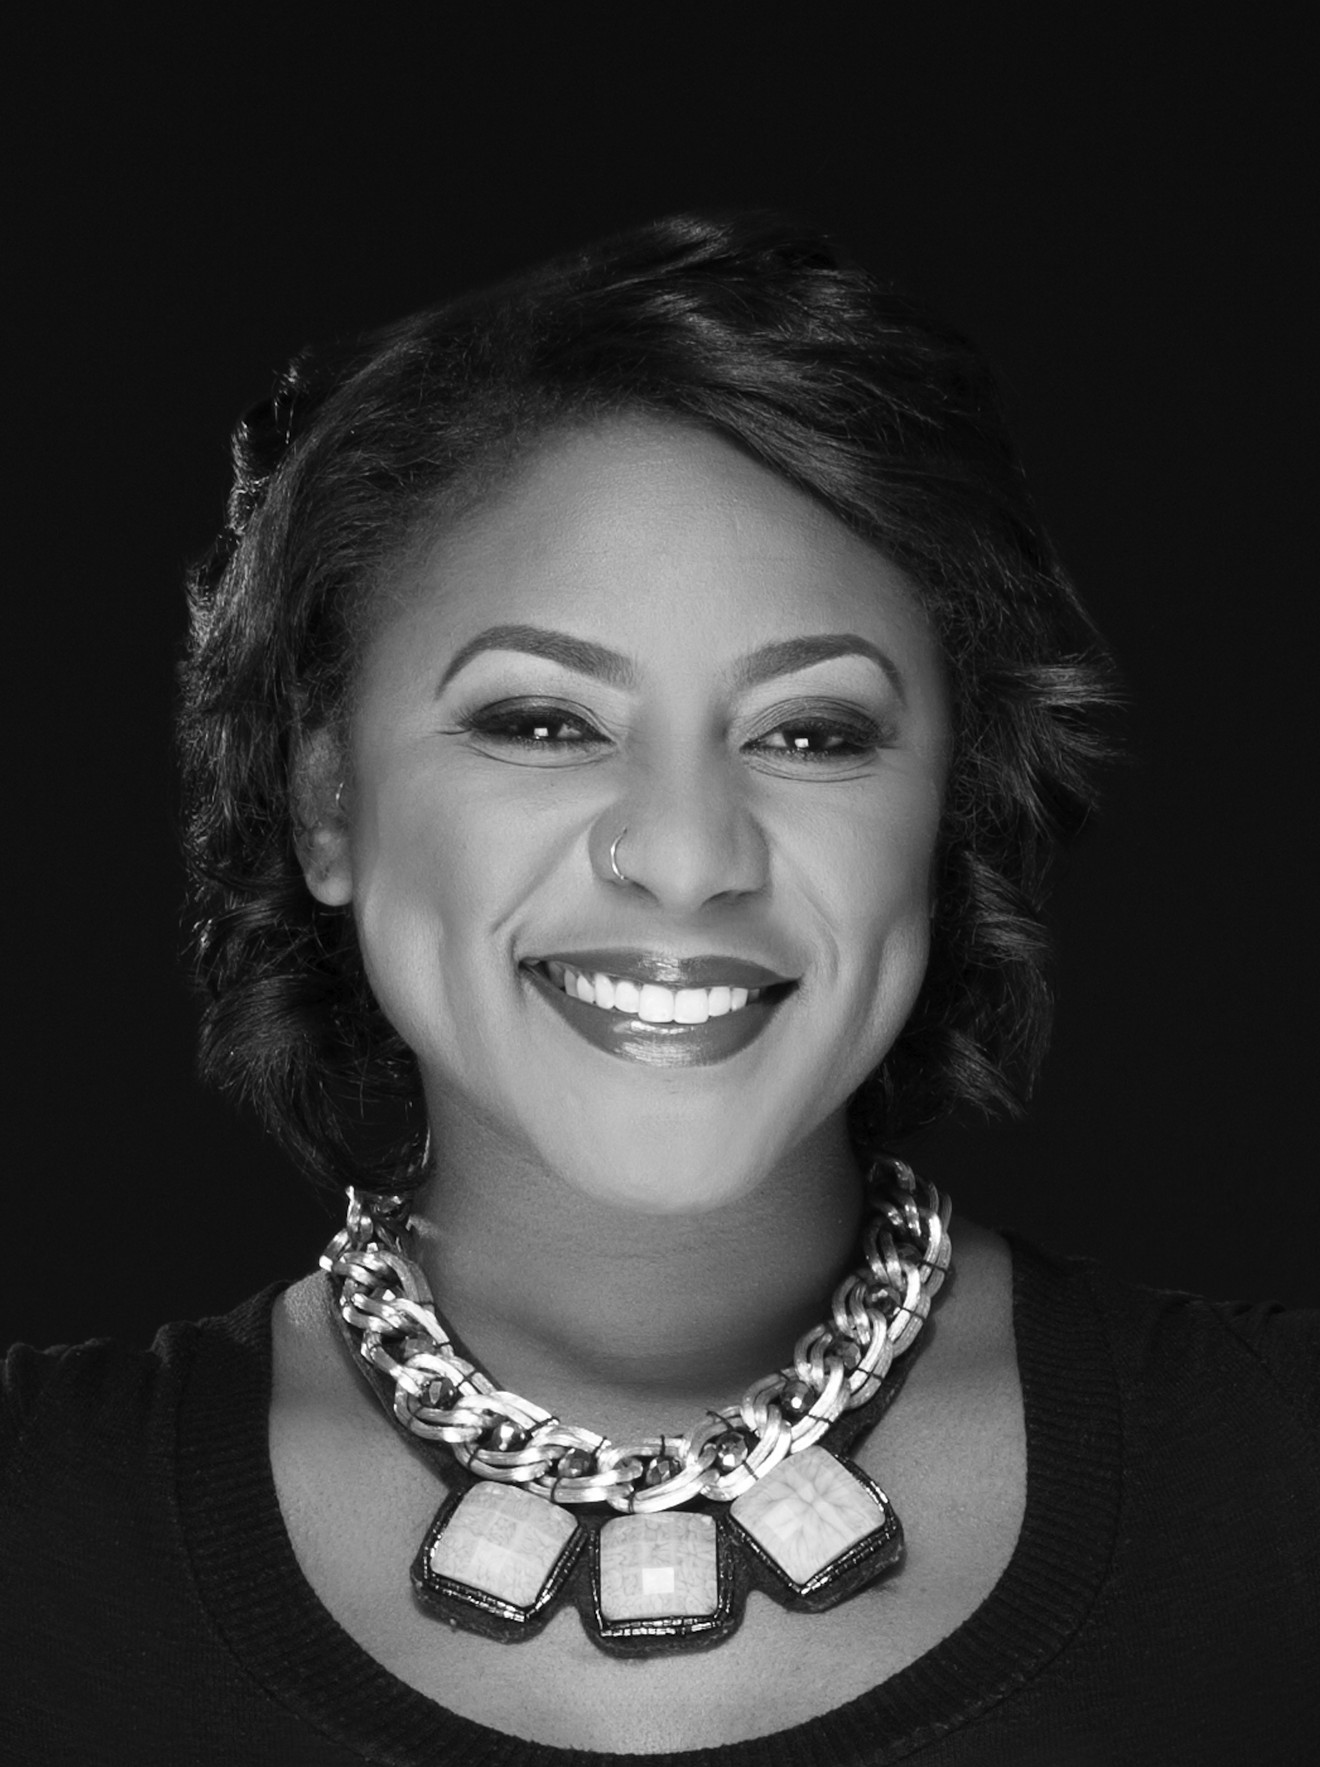 Alicia Garza, co-founder of Black Lives Matter as well as special projects director for the National Domestic Workers Alliance.